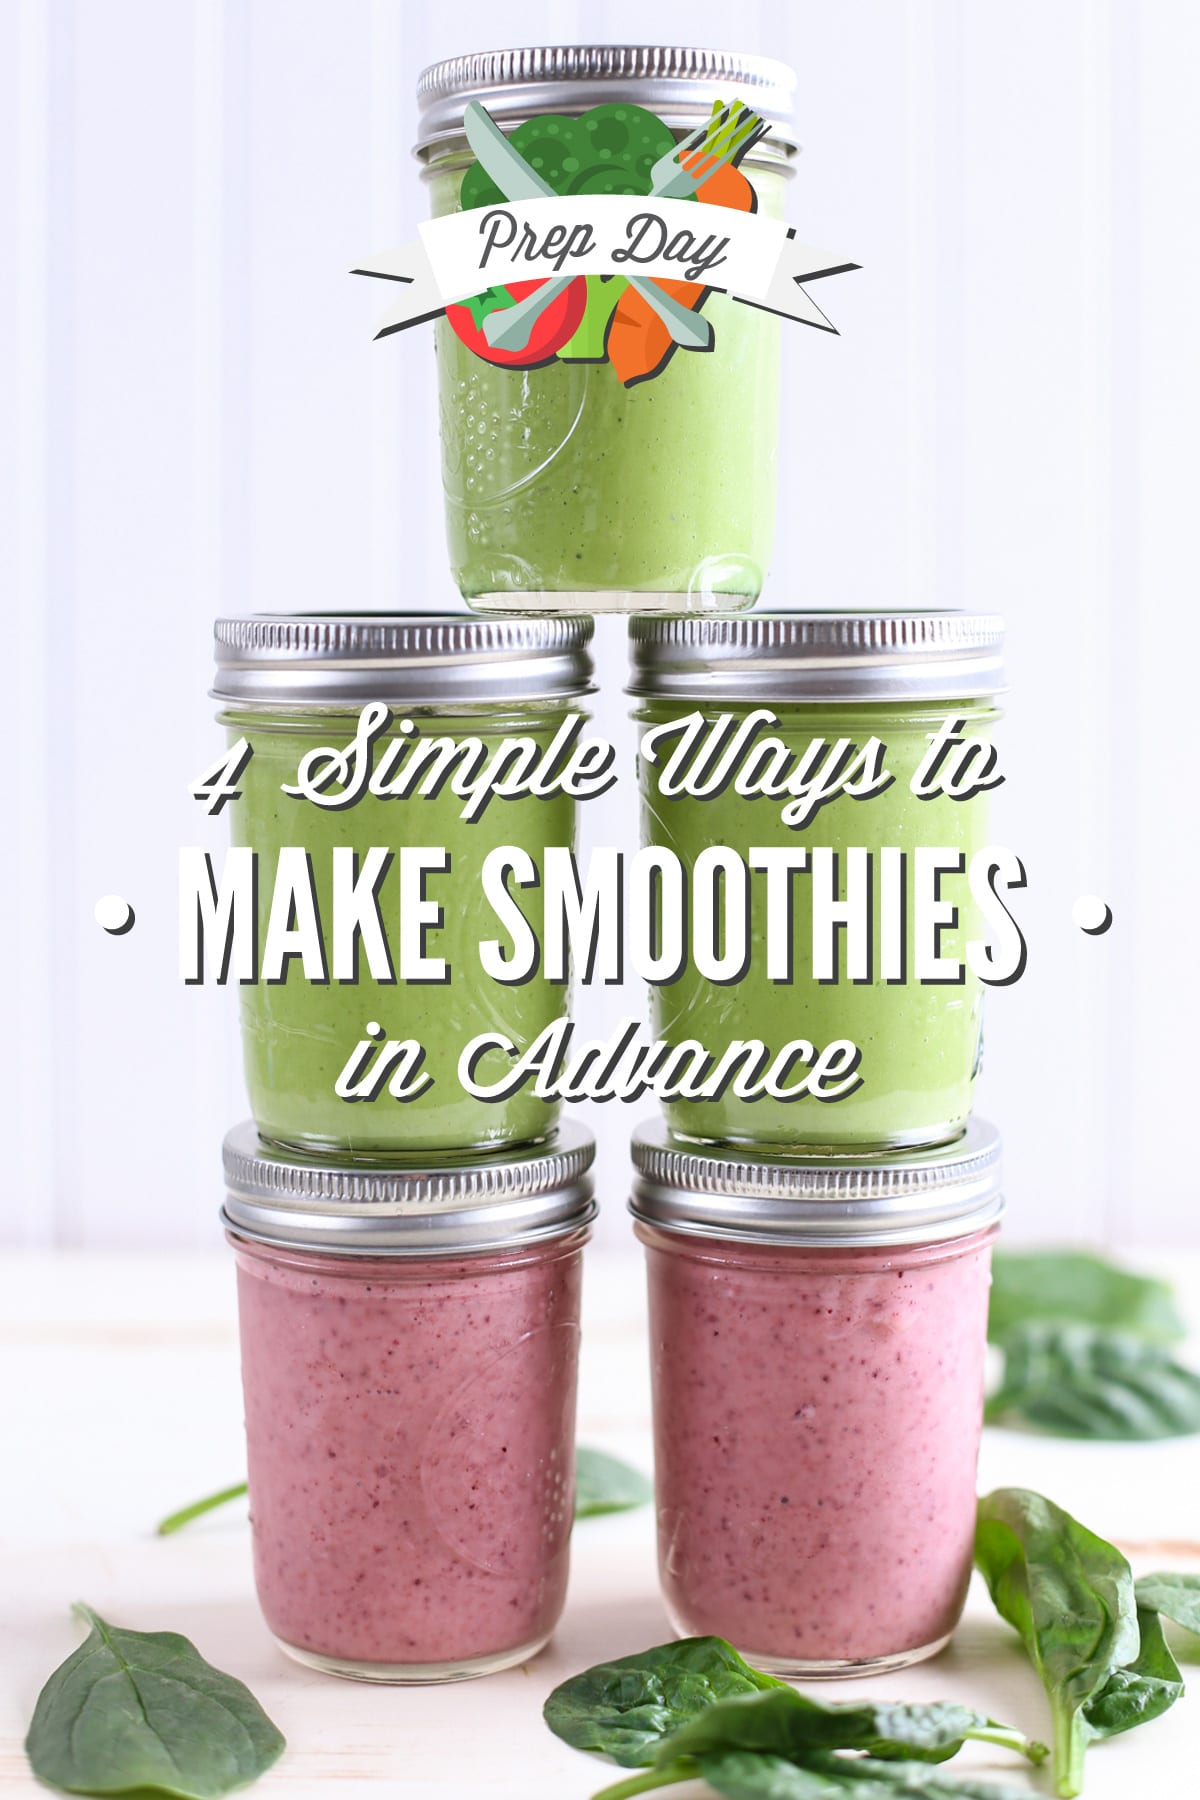 Prep Day: 4 Simple Ways to Make Smoothies in Advance